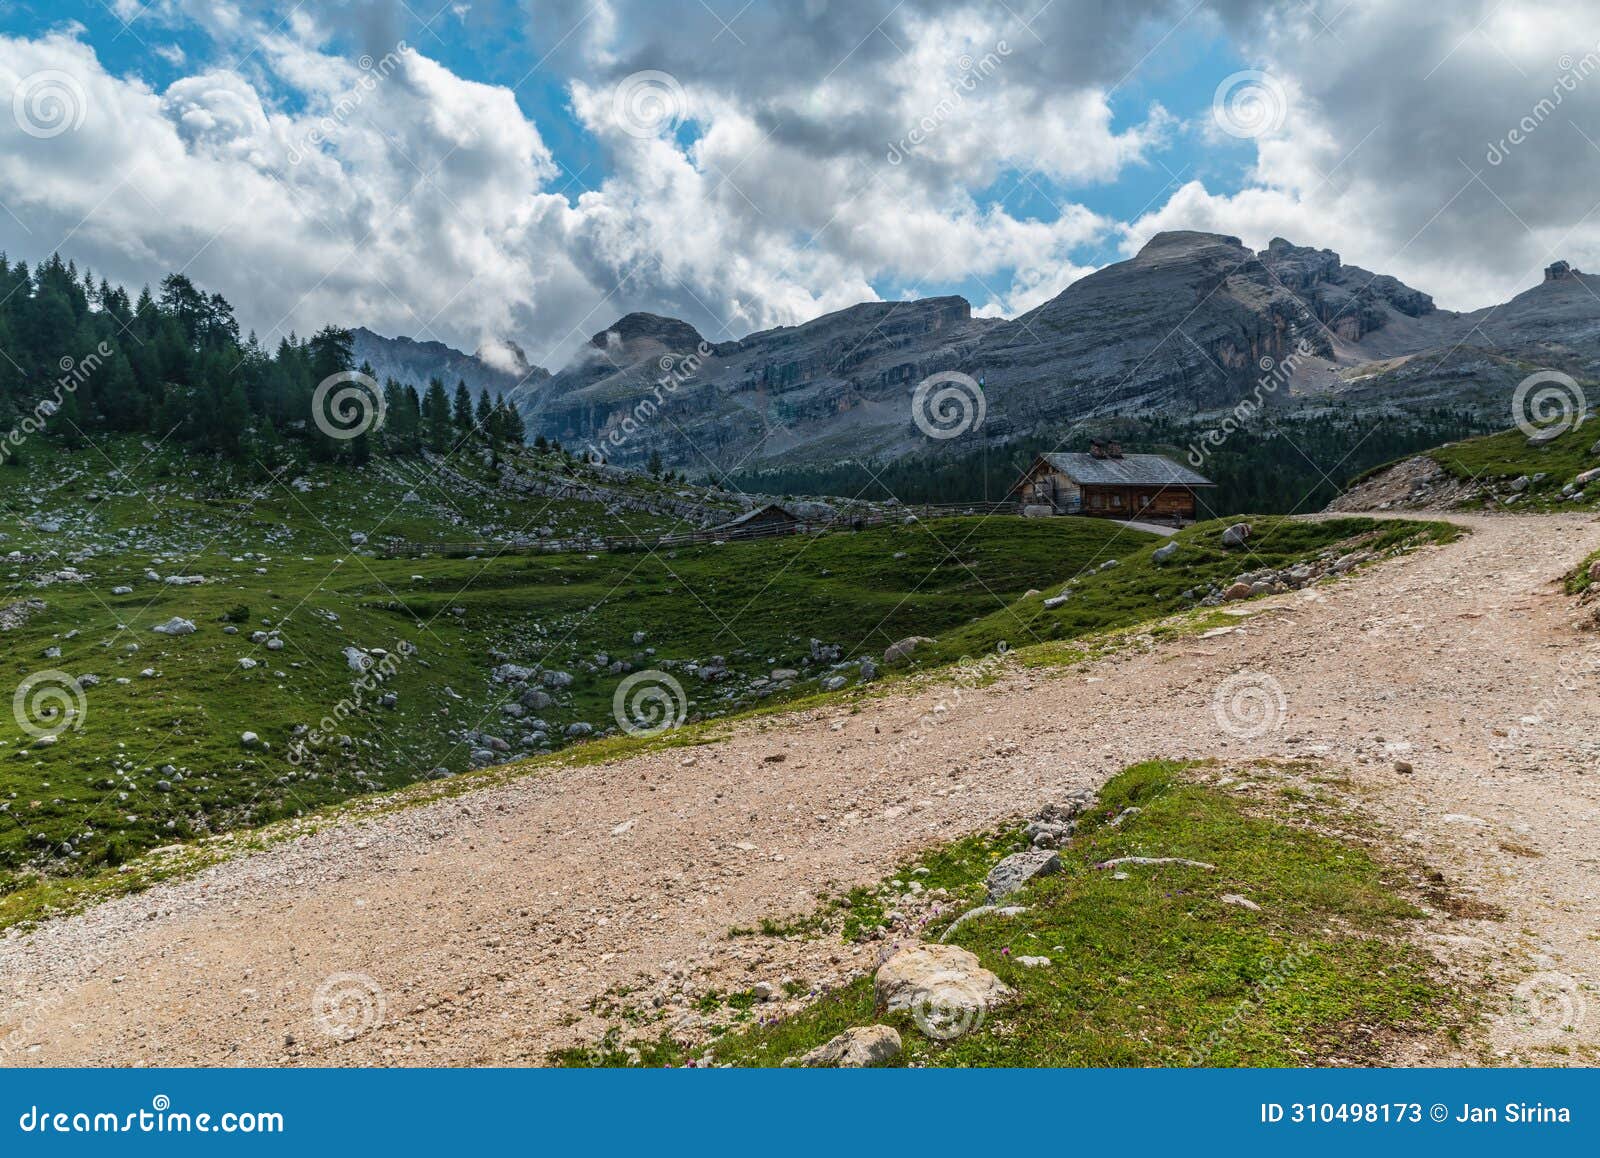 ucia de gran fanes hut with peaks above in the dolomites